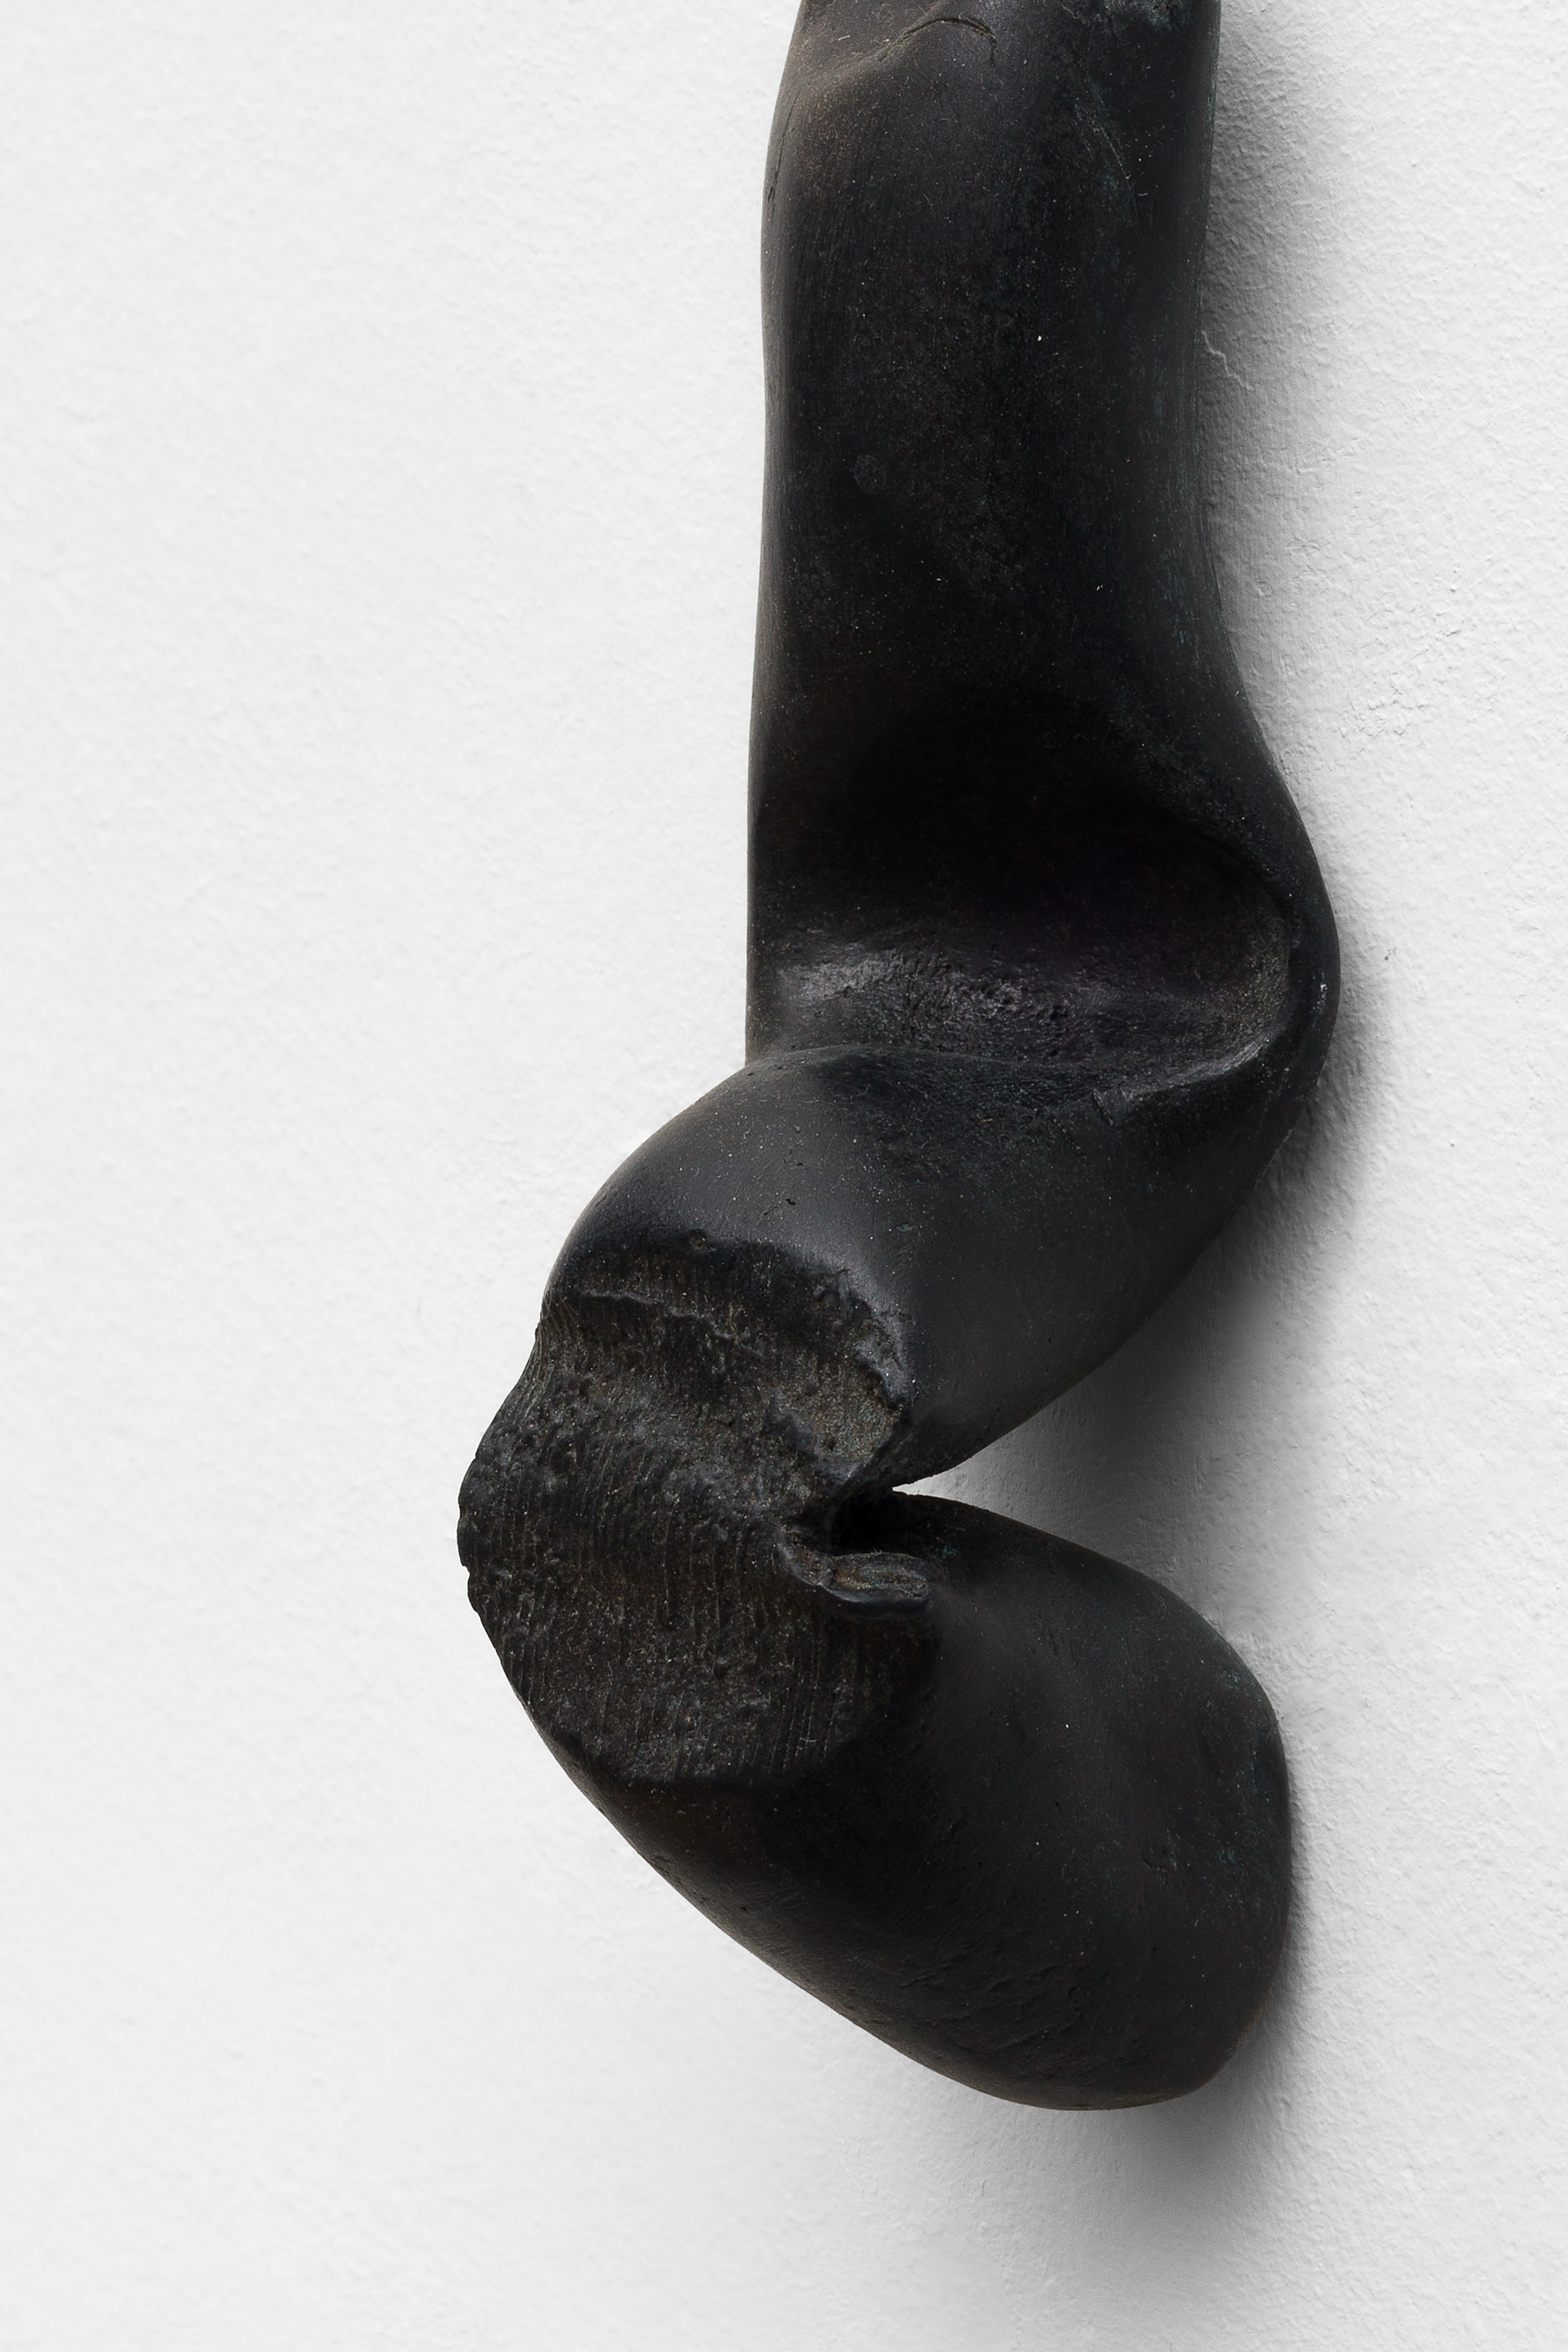 Detail view of Paulo Monteiro's Untitled patinated bronze sculpture